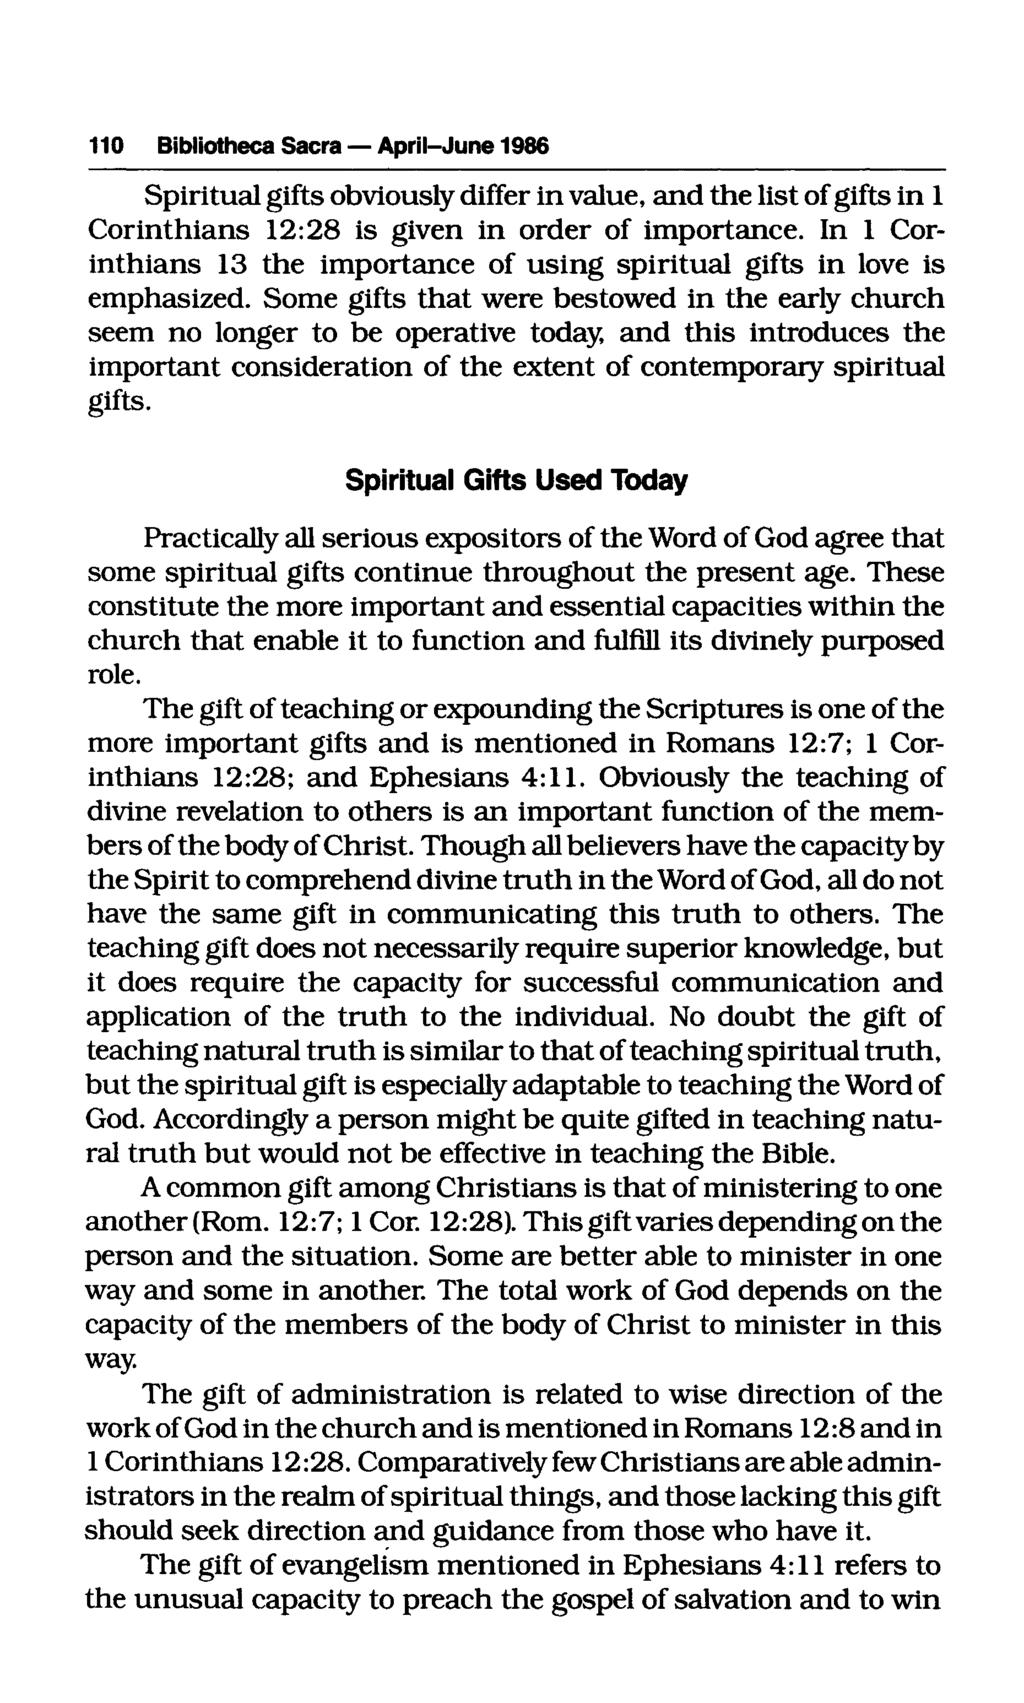 110 Bibliotheca Sacra April-June 1986 Spiritual gifts obviously differ in value, and the list of gifts in 1 Corinthians 12:28 is given in order of importance.